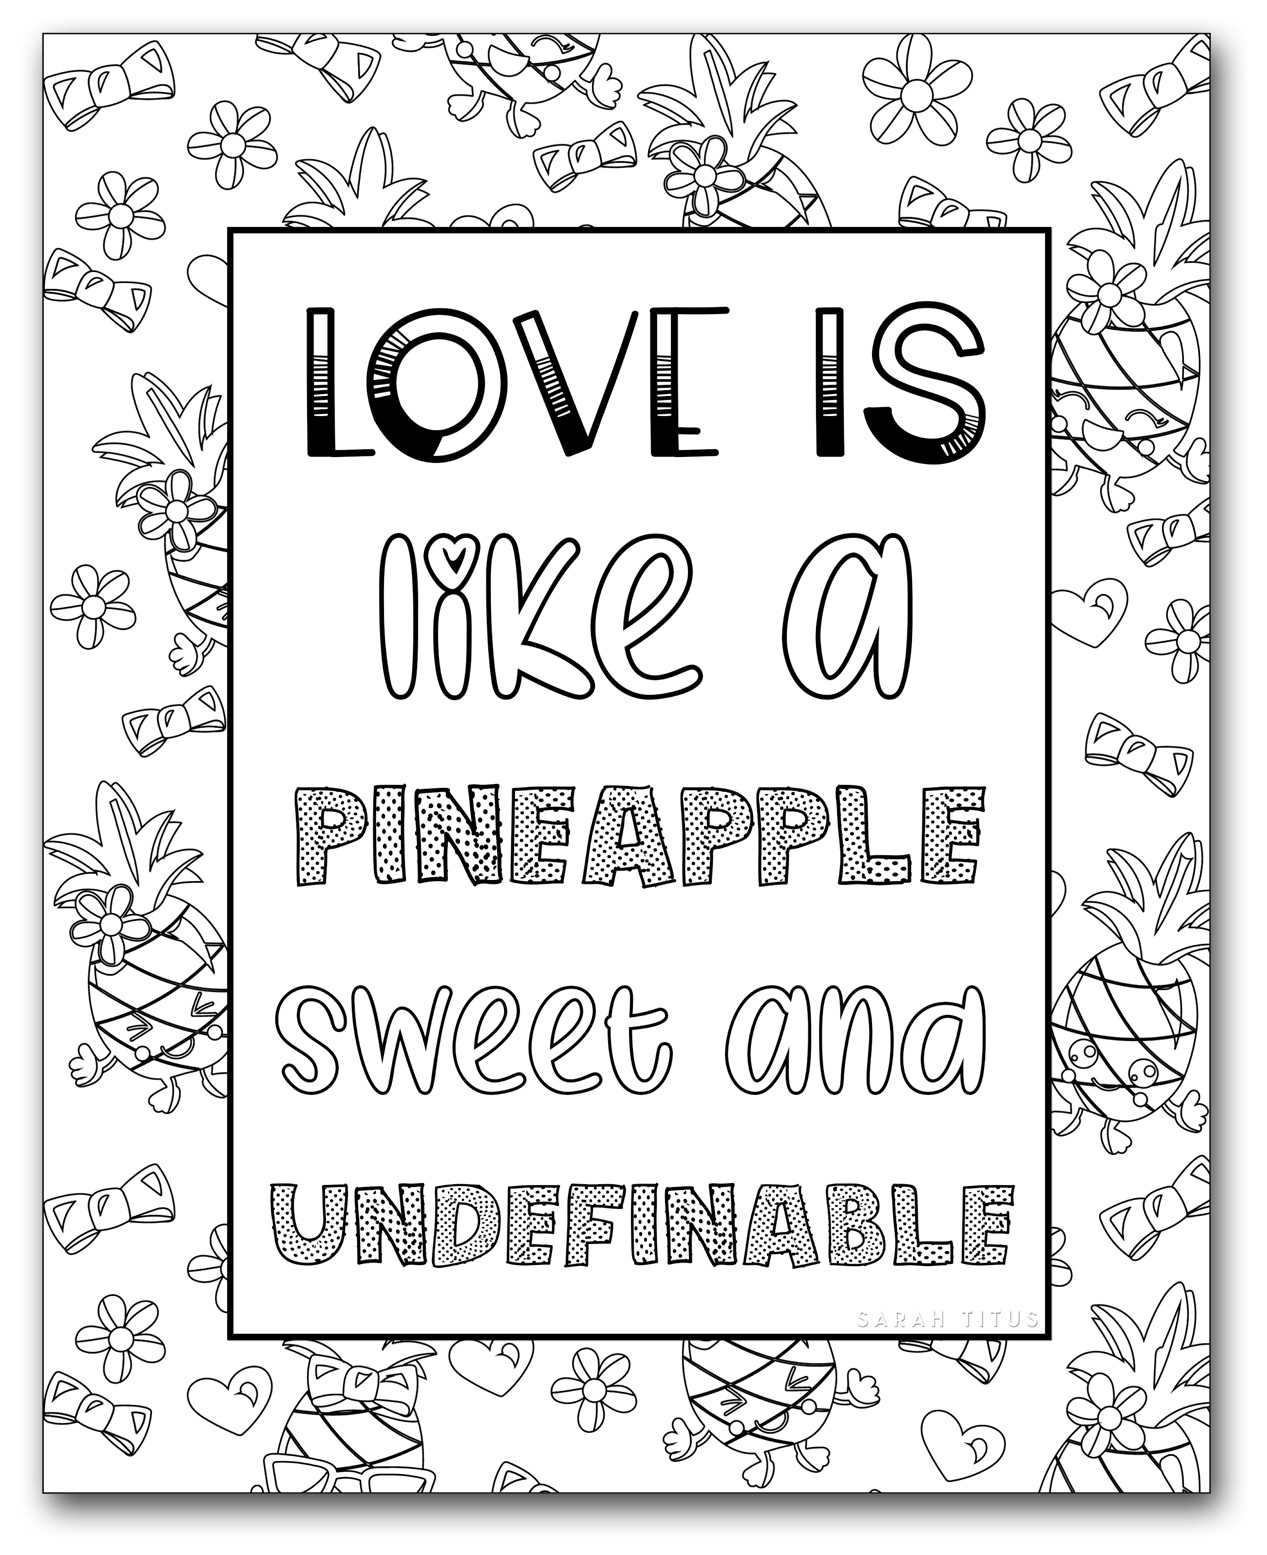 Printable Coloring Pages For Teen Girls
 Printable Coloring Pages for Girls Sarah Titus